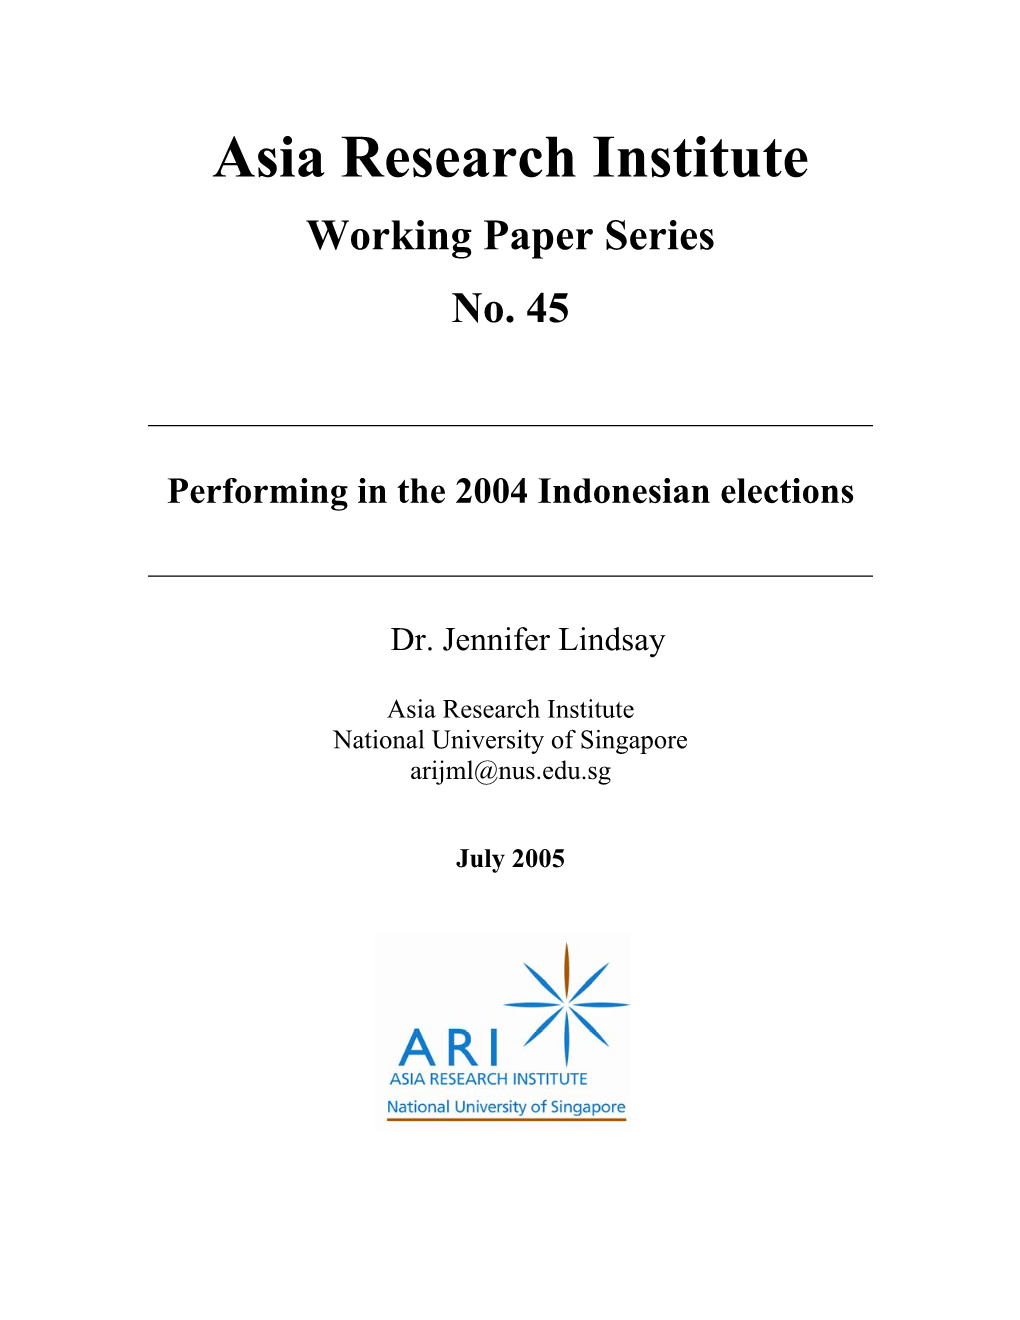 The ARI Working Paper Series Is Published Electronically by the Asia Research Institute of the National University of Singapore